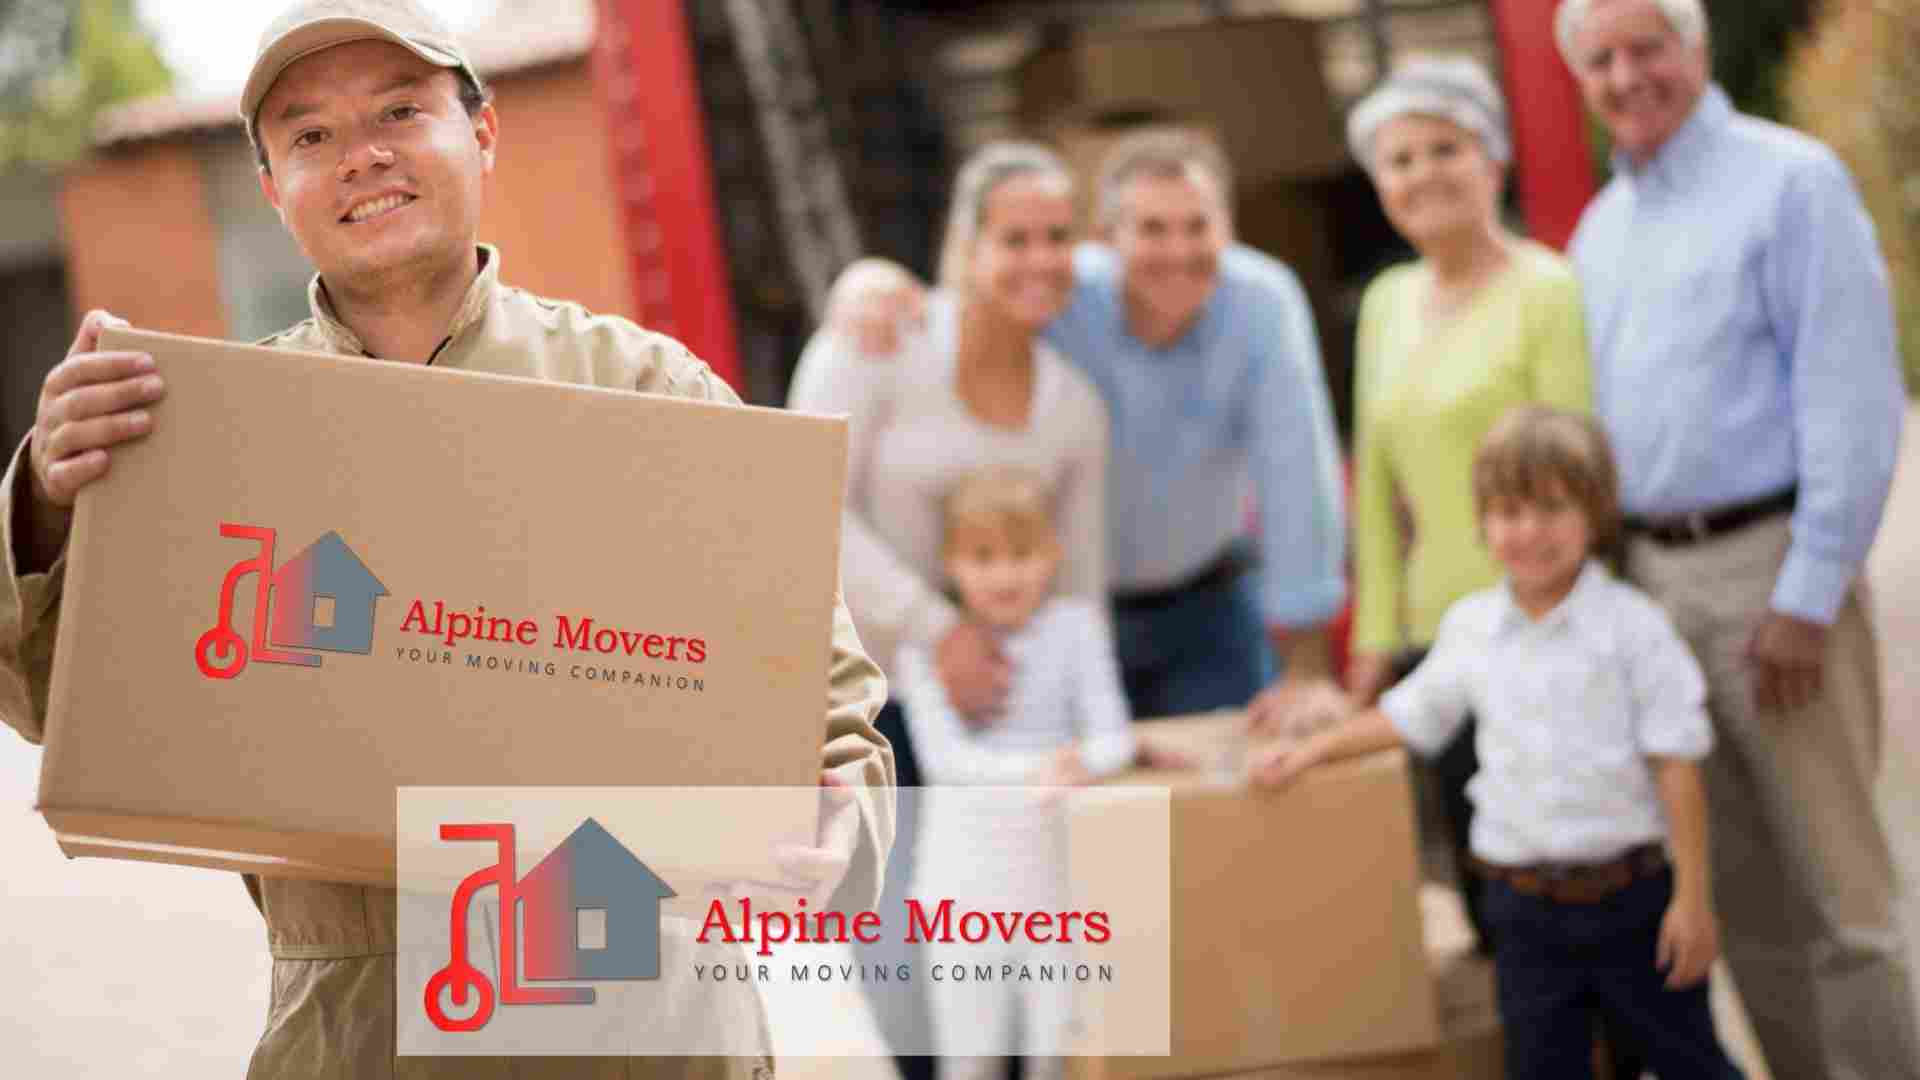 offices for moving and packing services - AlpineMovers